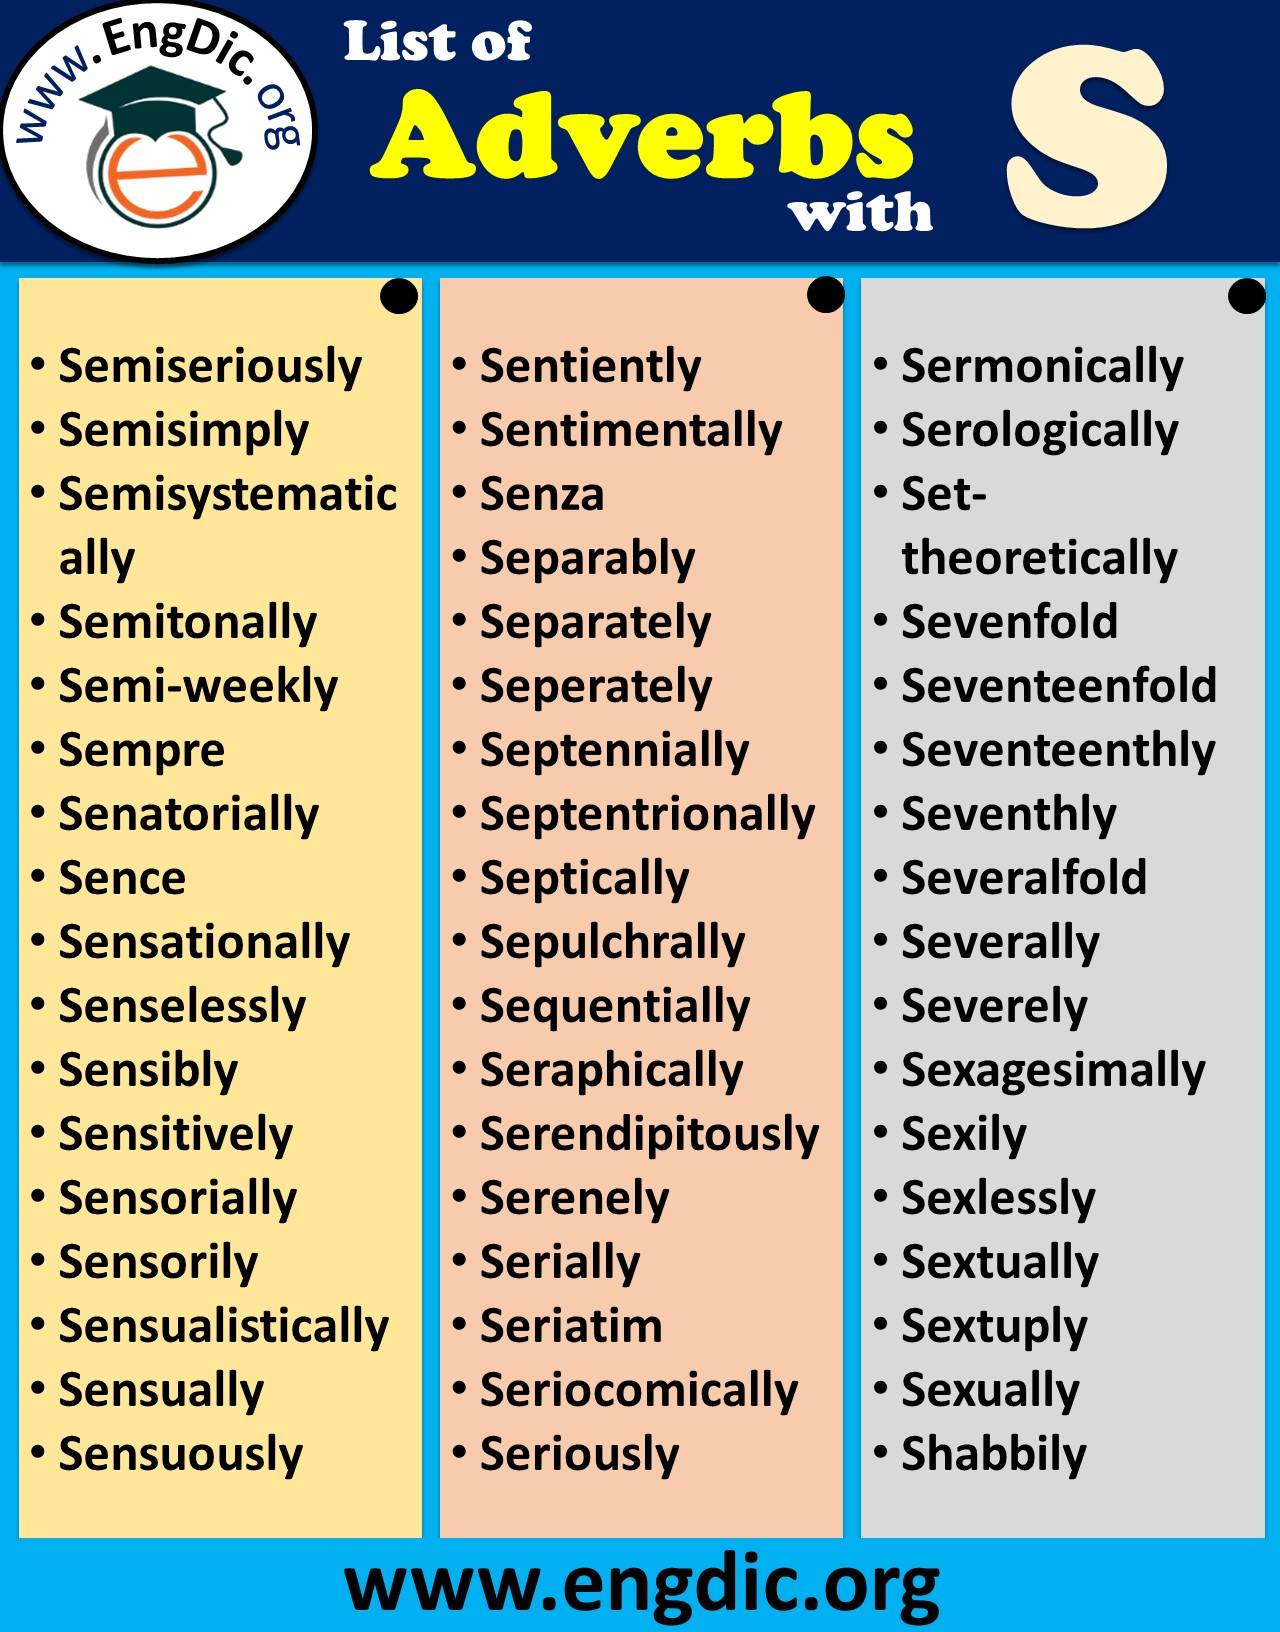 List of adverbs starting with s